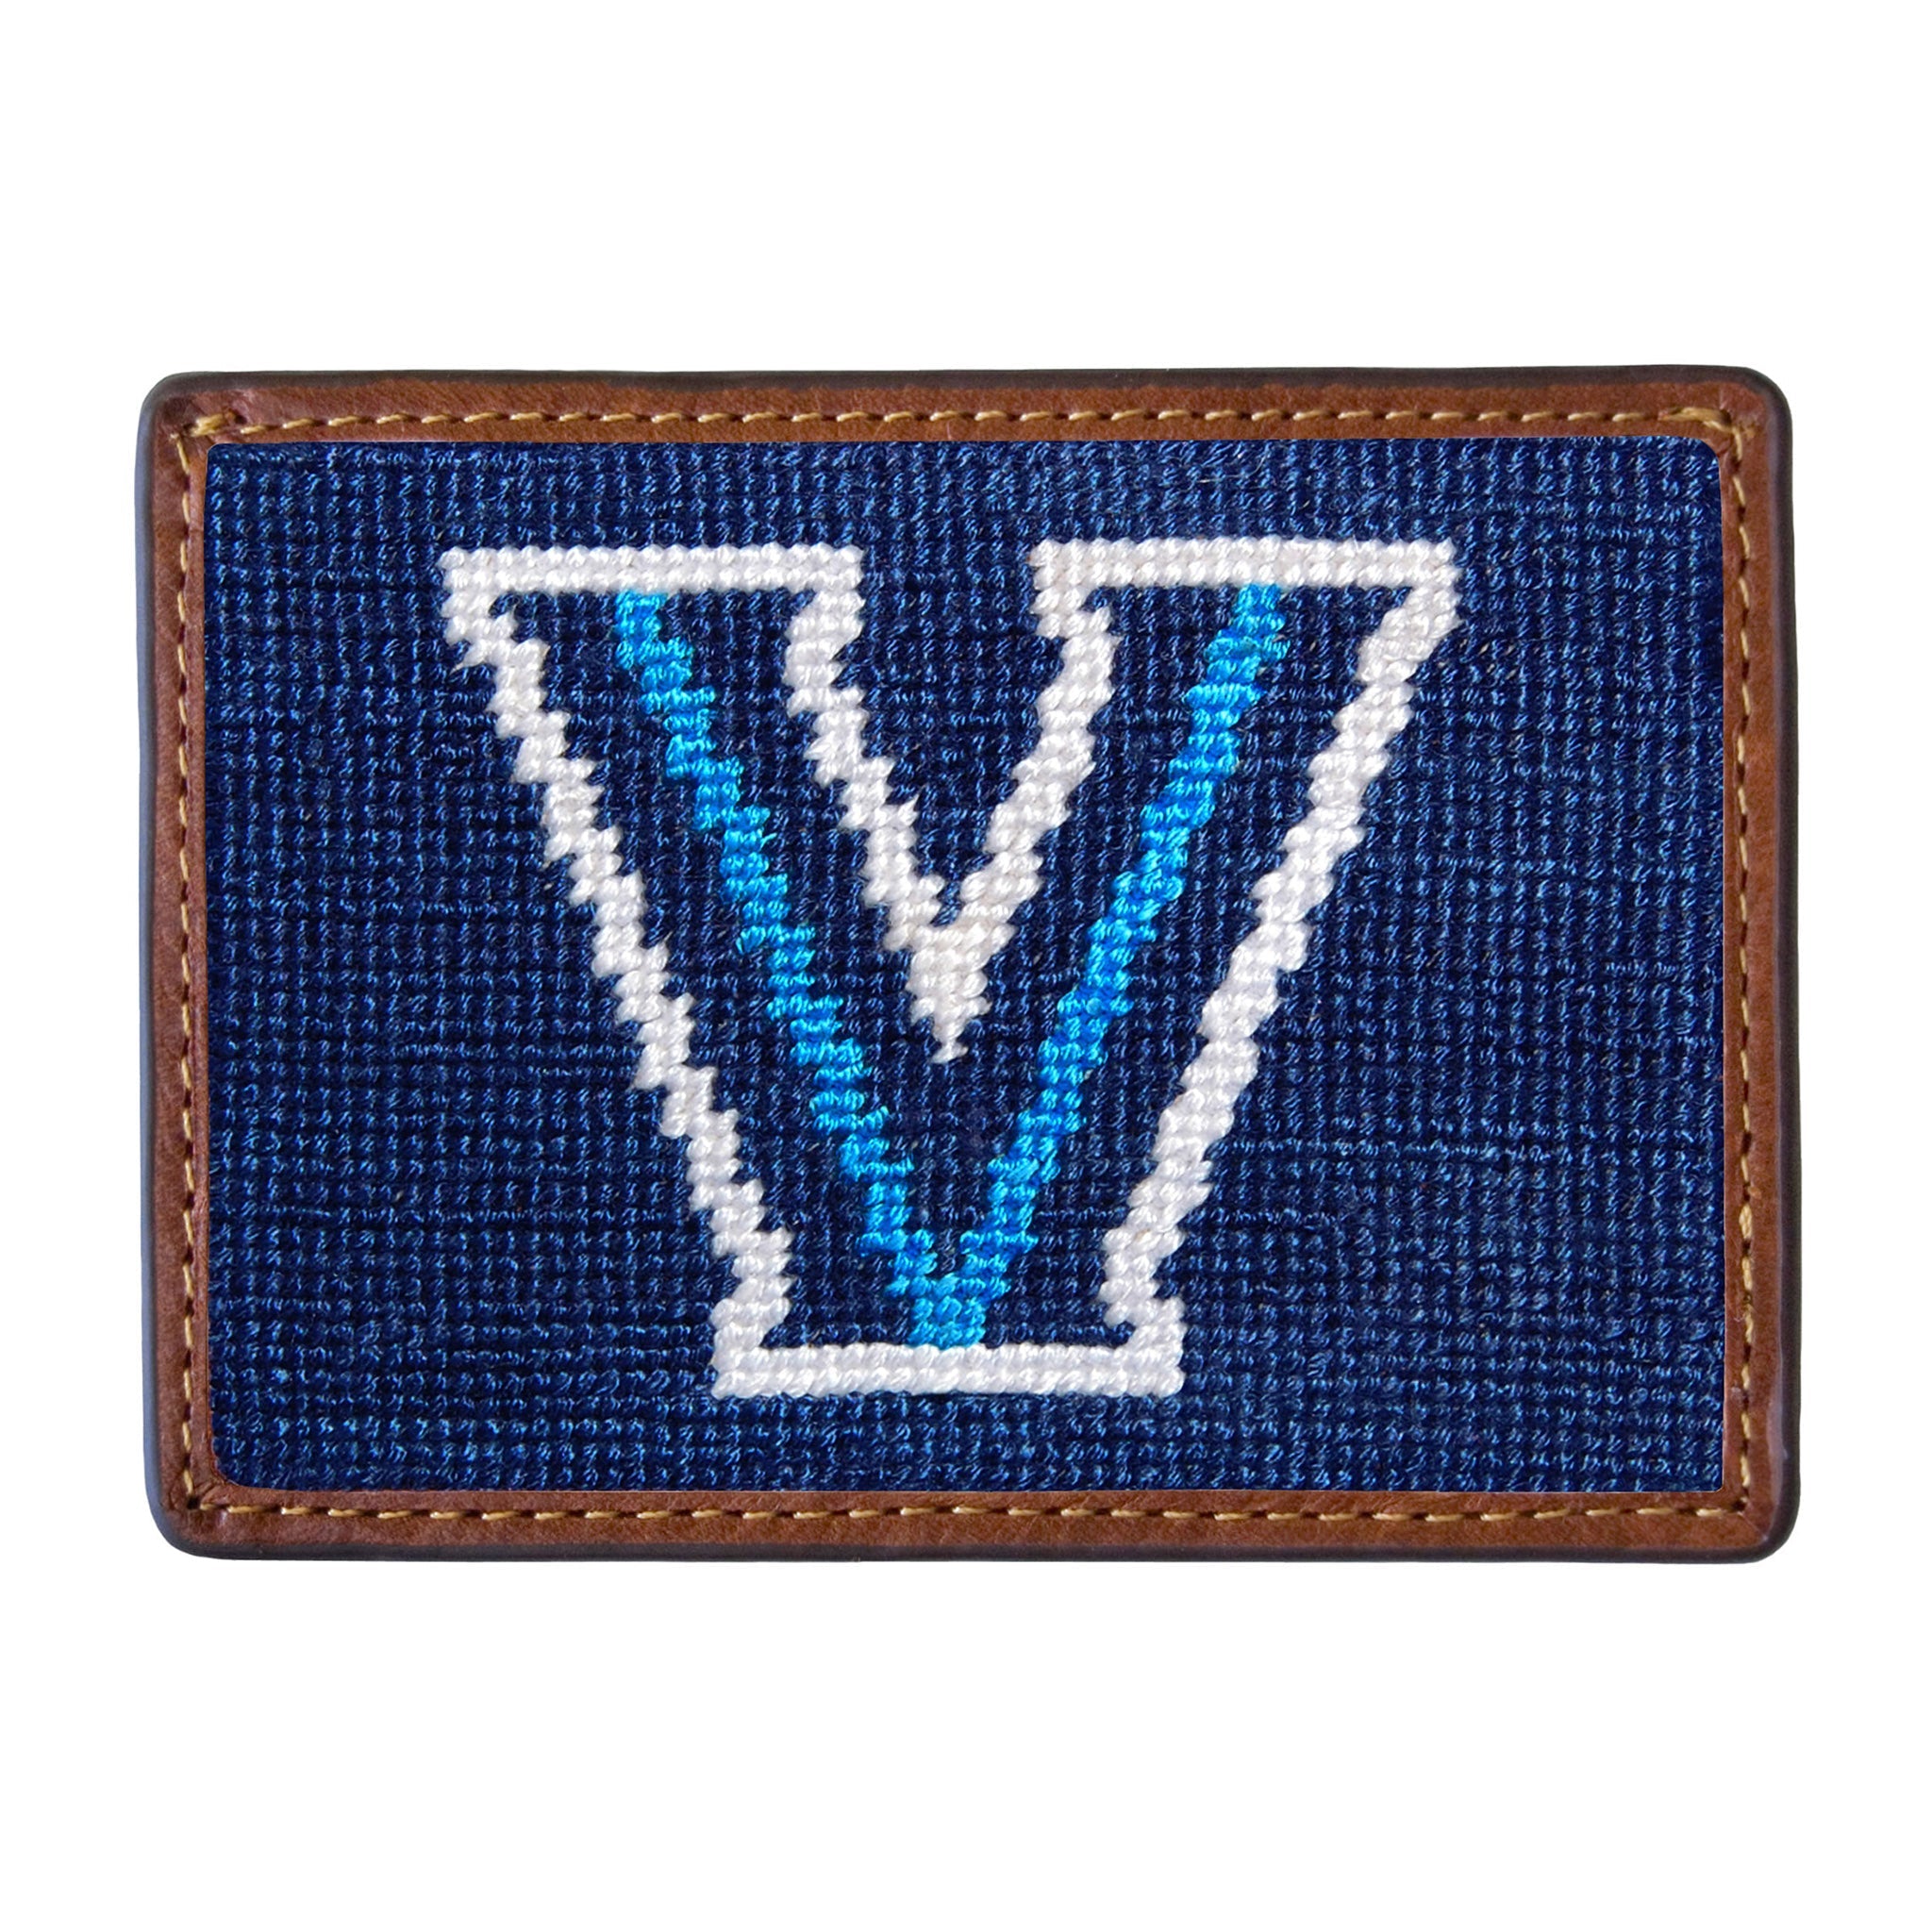 Smathers and Branson Villanova Needlepoint Credit Card Wallet Front side